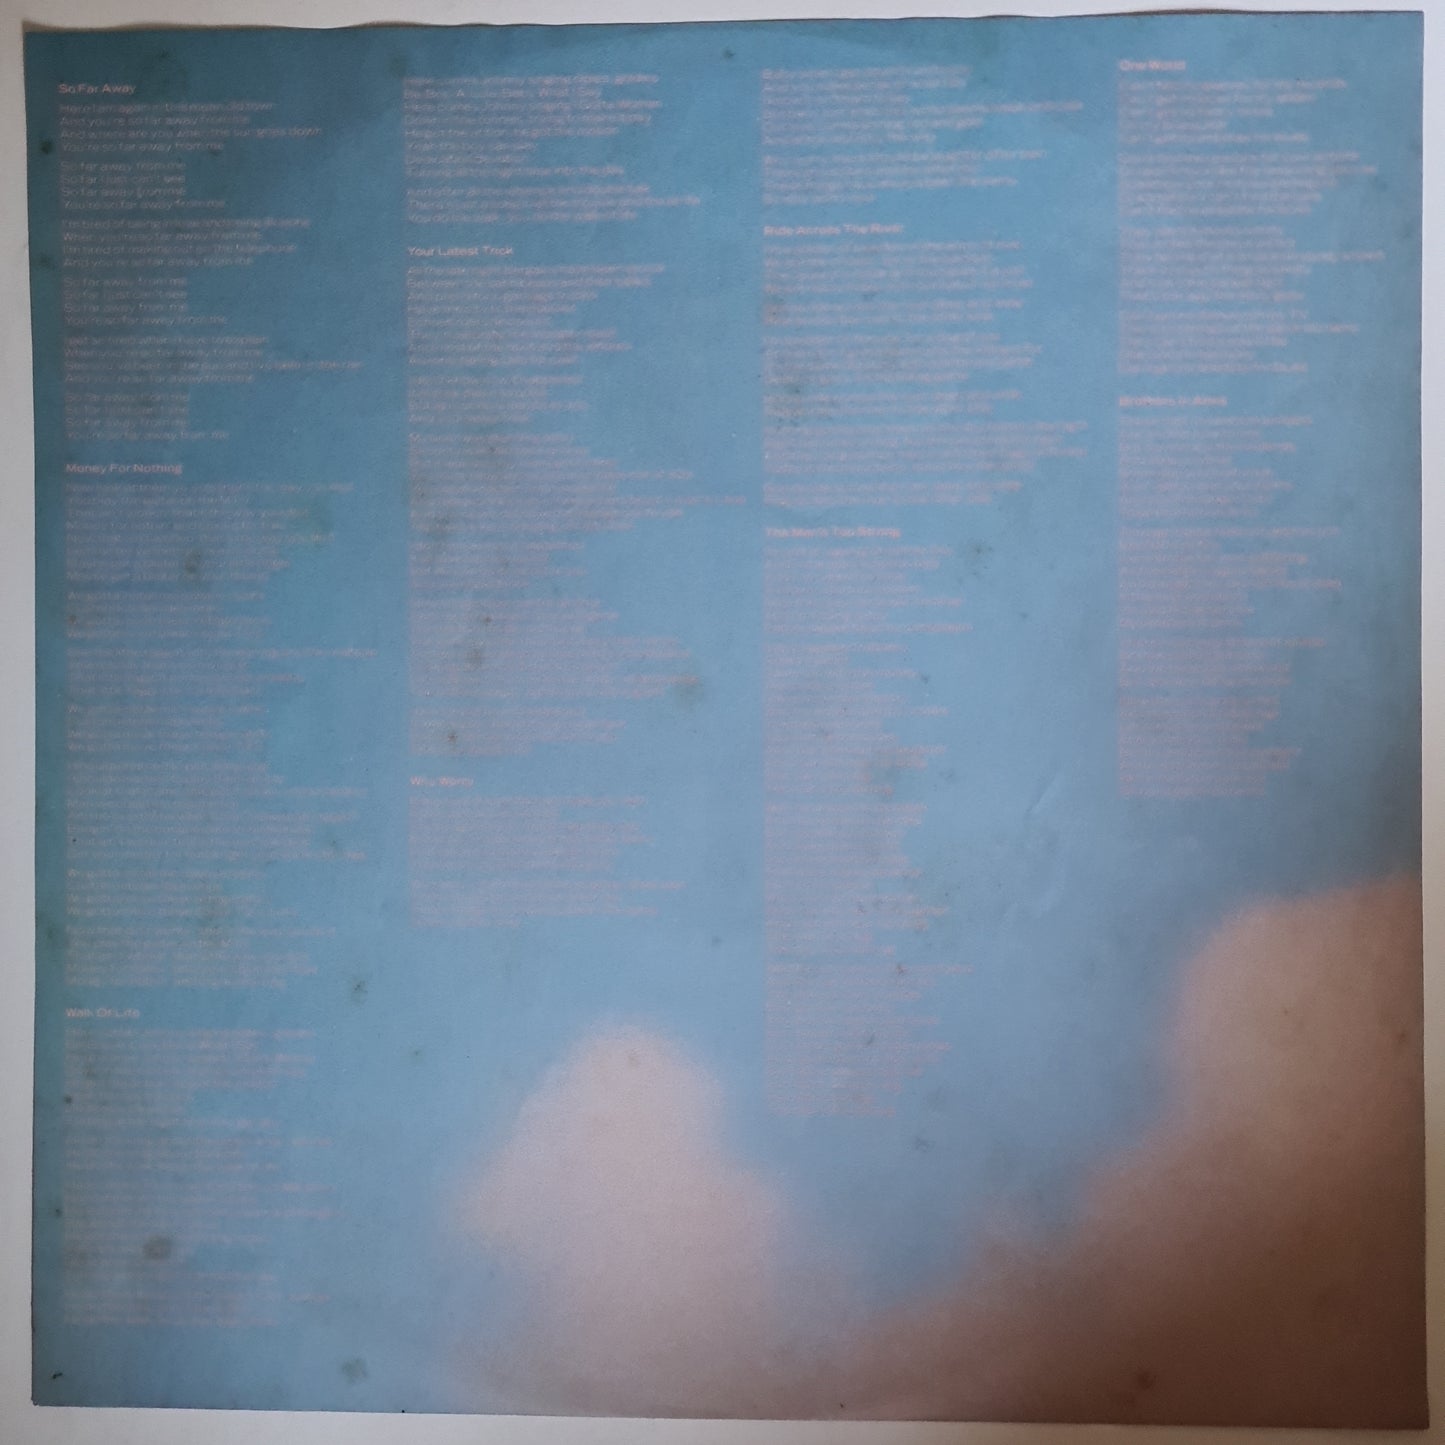 Dire Straits – Brothers In Arms - 1985 - Vinyl Record